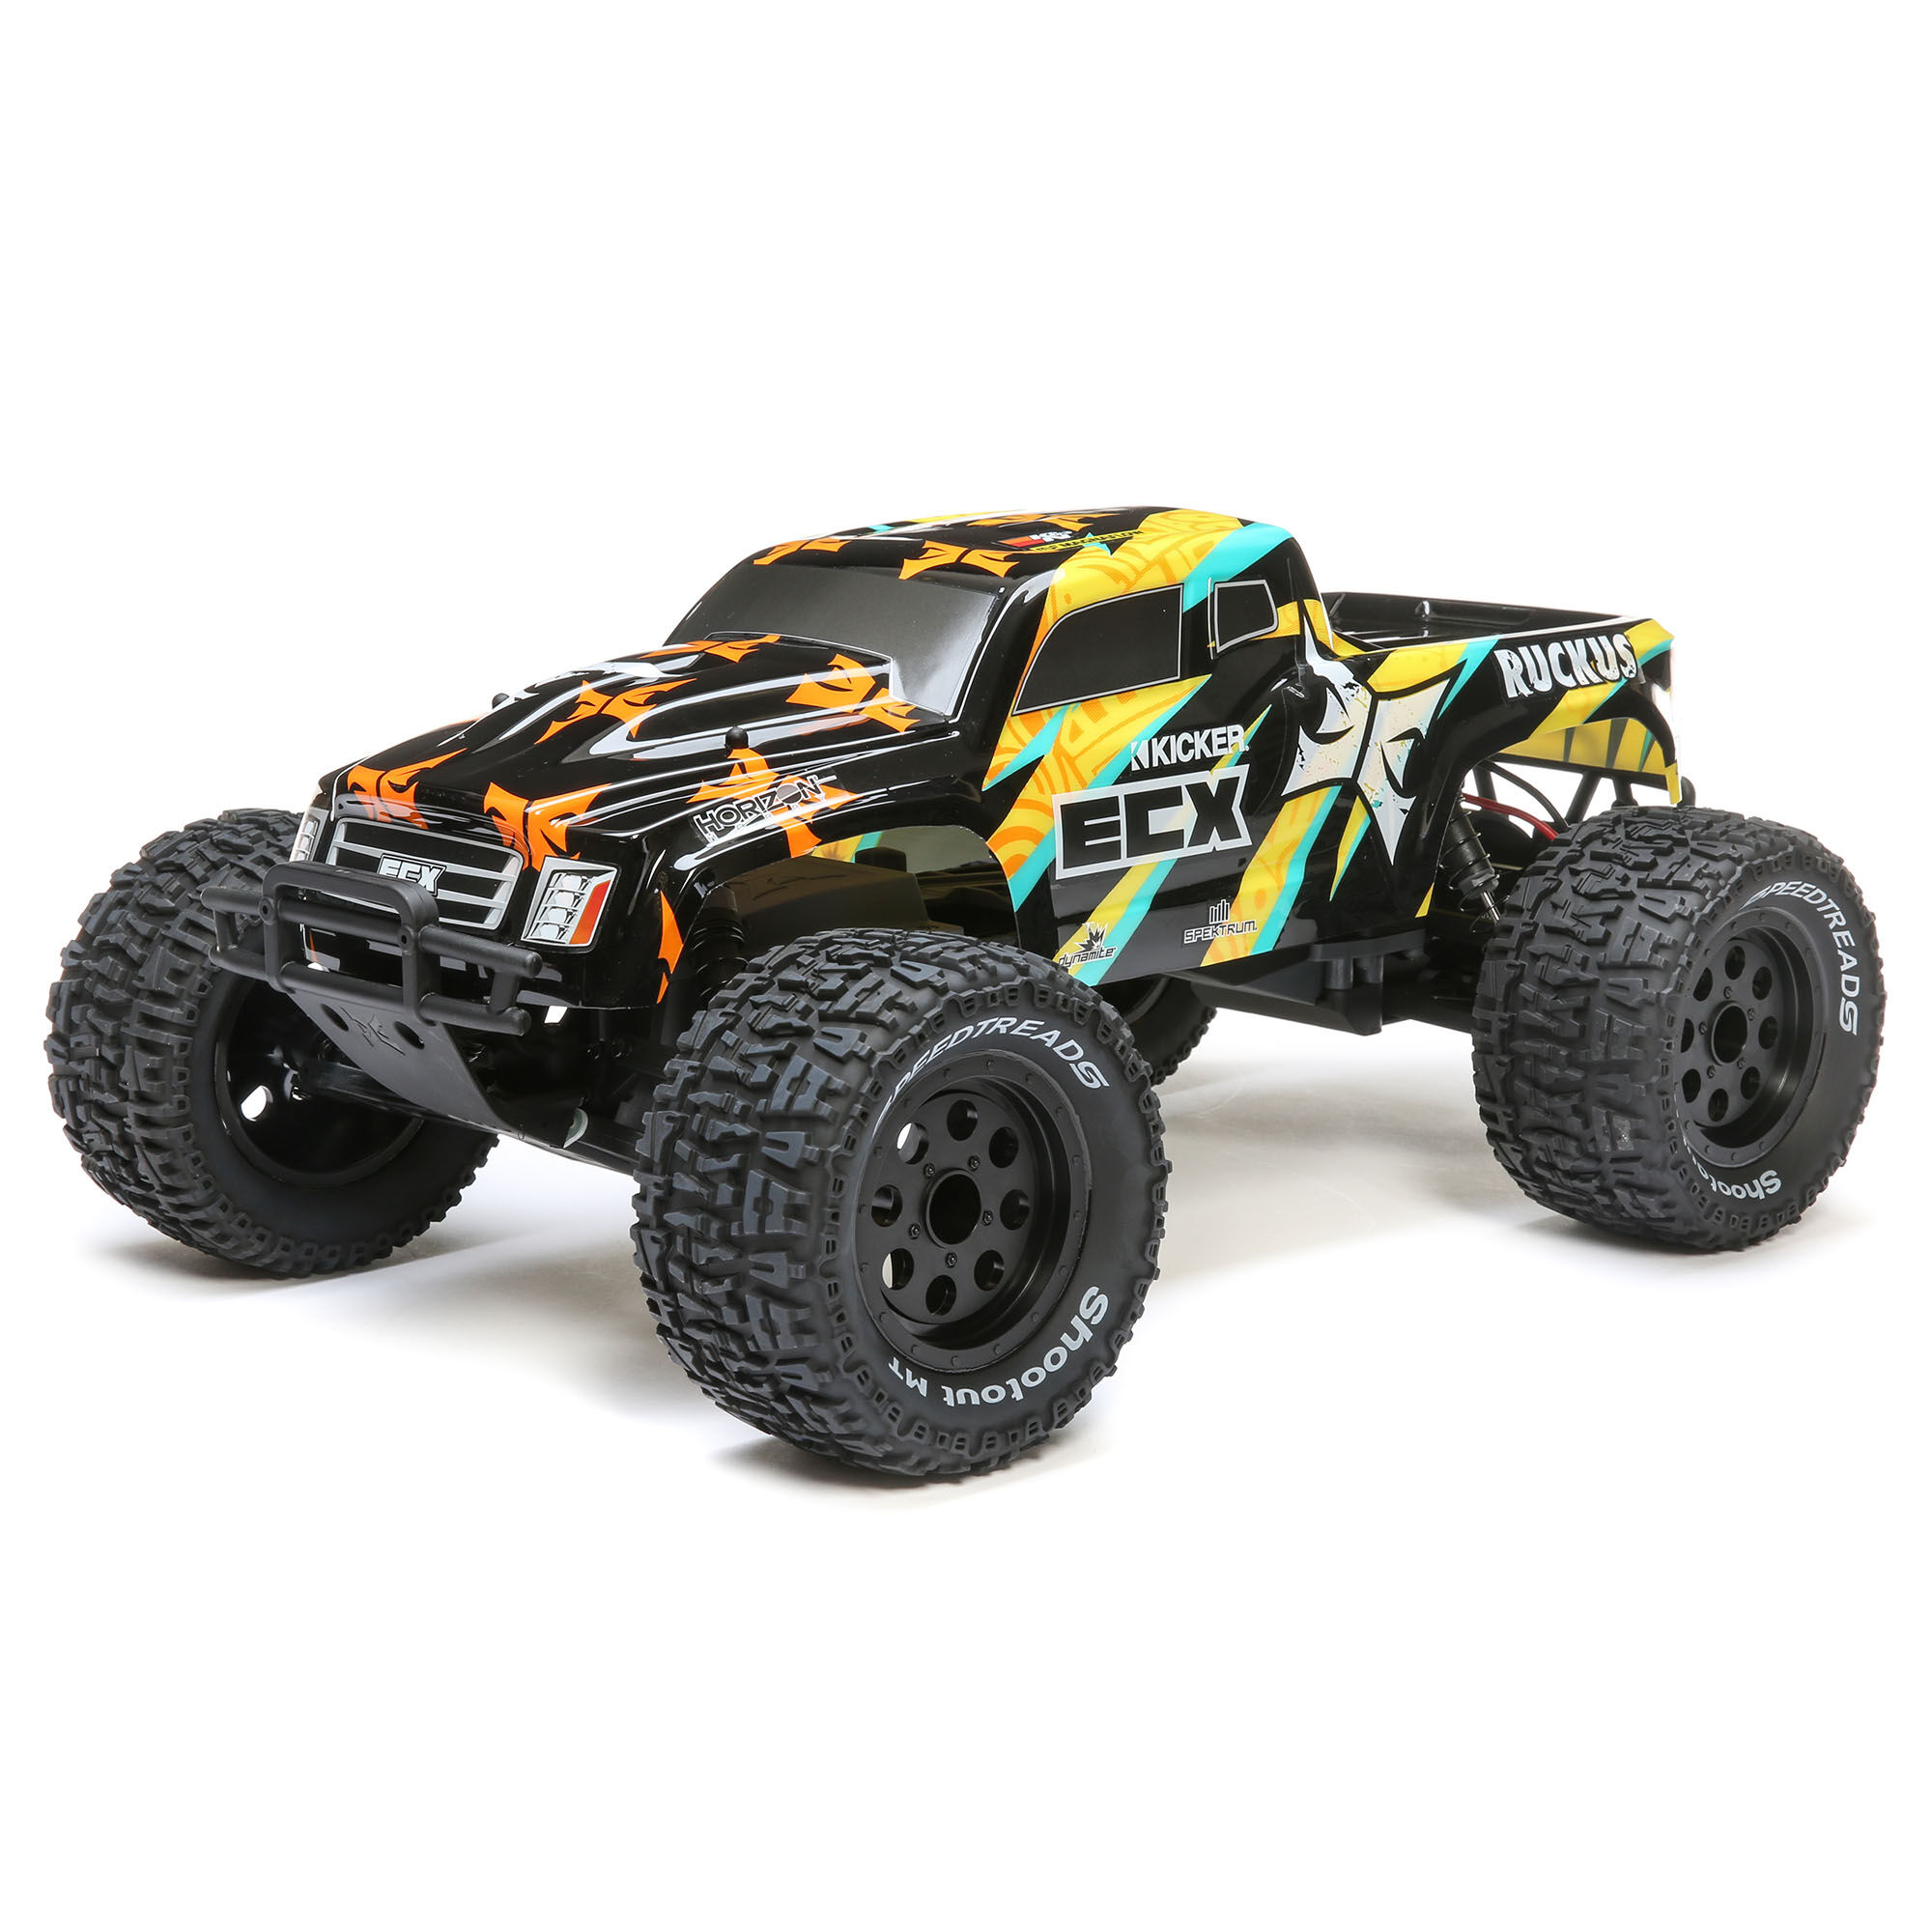 Ruckus 2WD Monster Truck Brushed RTR 